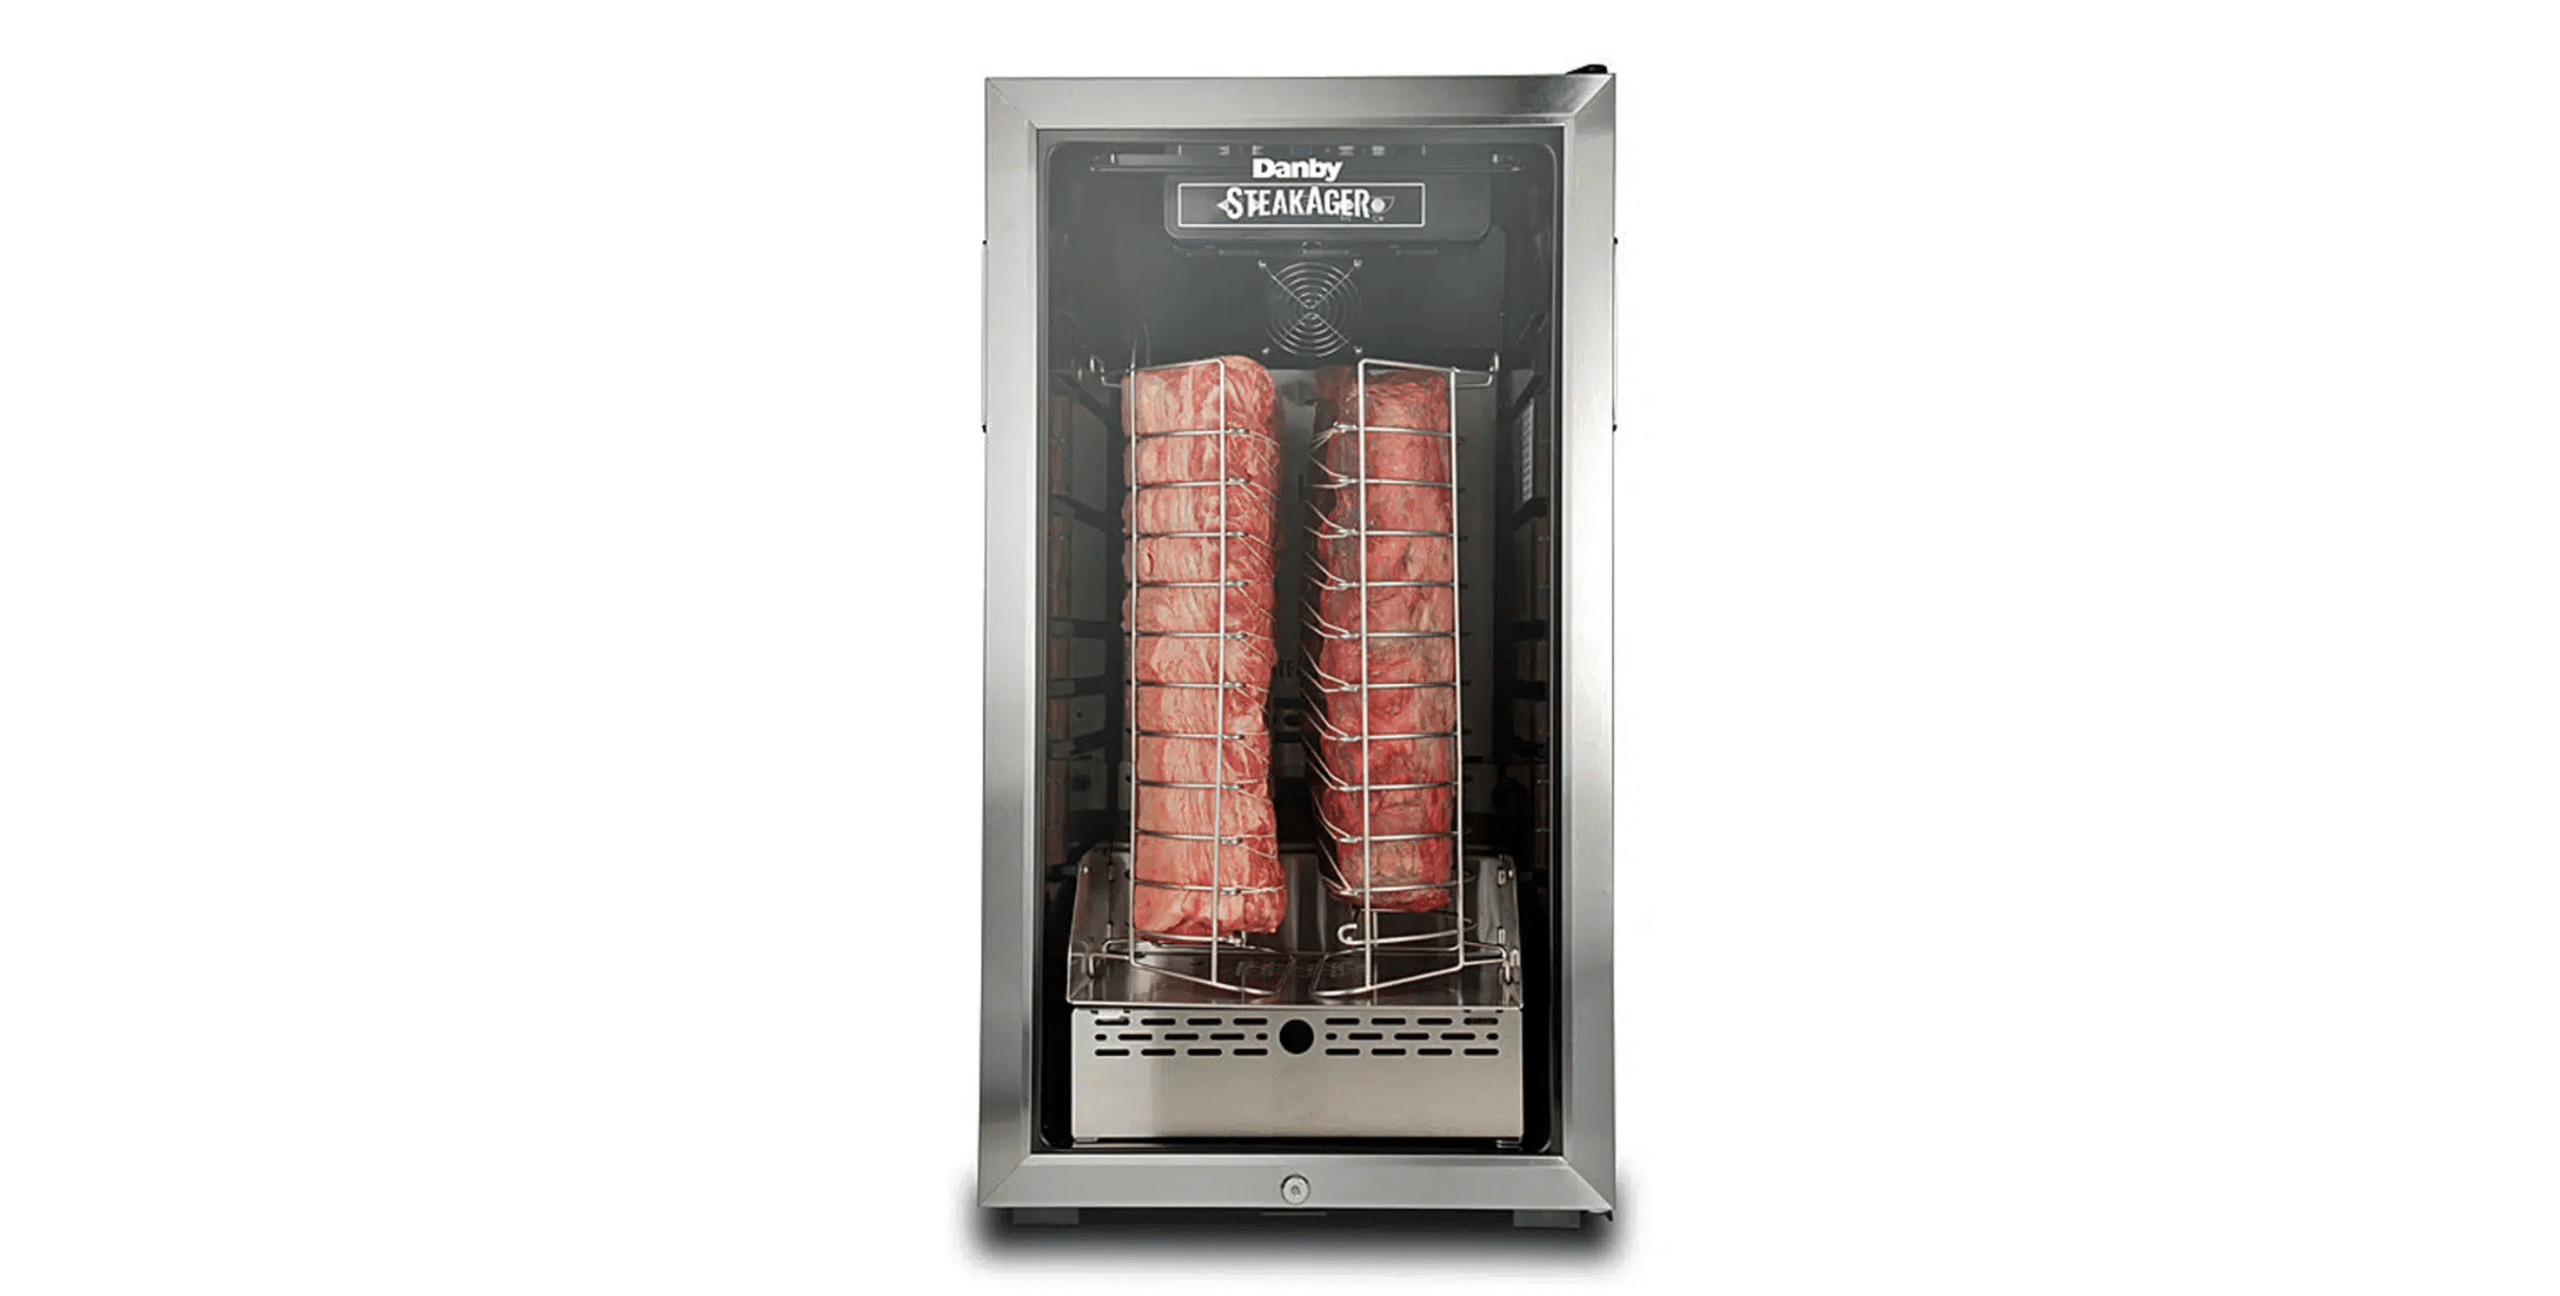  SteakAger PRO 40 Home Beef Dry Aging Refrigerator